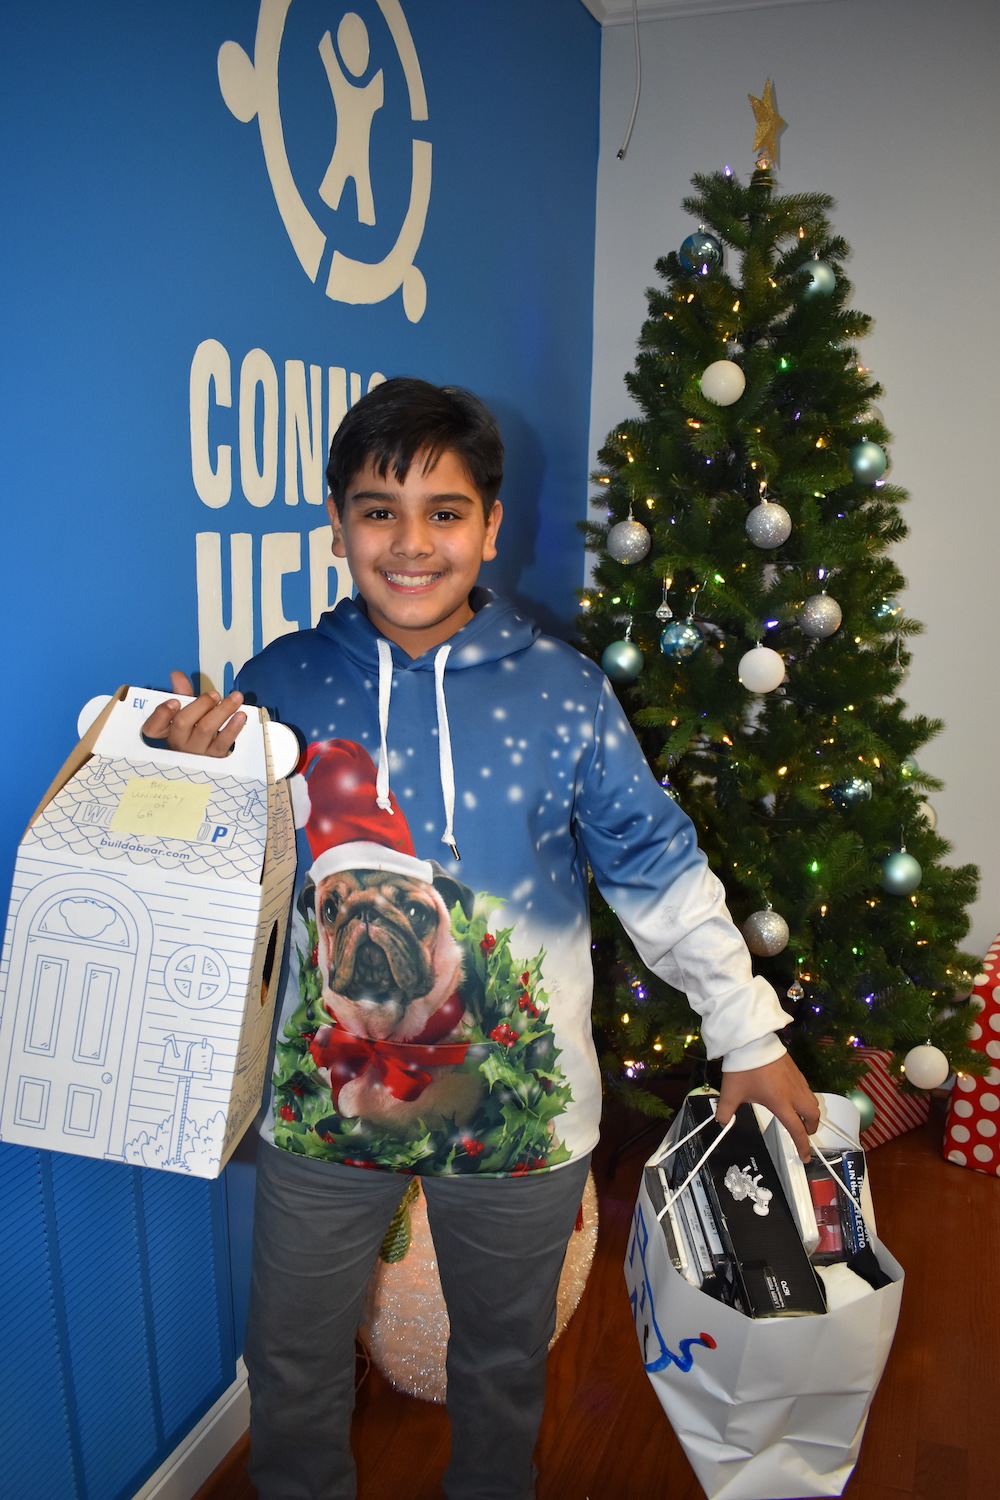 A teen holding a box and a gift bag full of presents